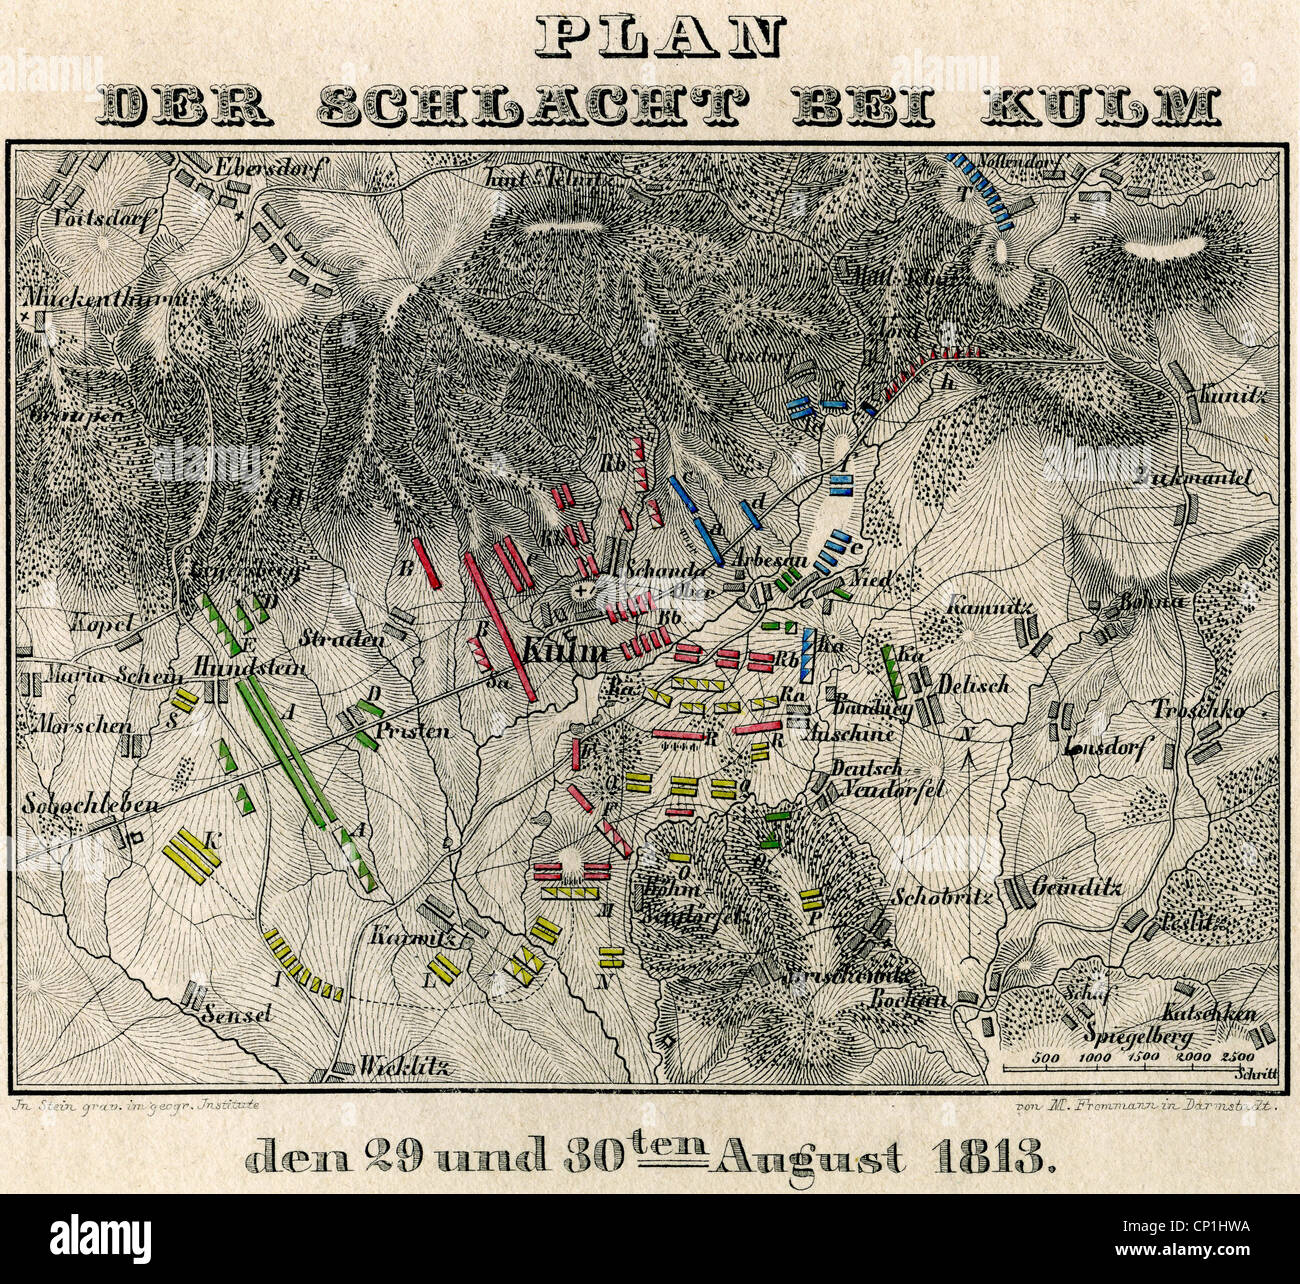 events, War of the Sixth Coalition 1812 - 1814, Battle of Kulm, 29./30.8.1813, map of the battle, coloured wood engraving by F. Frommann, published by G. Westermann, Brunswick, 19th century, Napoleonic Wars, France, Russia, Austria, Bohemia, autumn campaign, Chlumec, plan, historic, historical, Additional-Rights-Clearences-Not Available Stock Photo